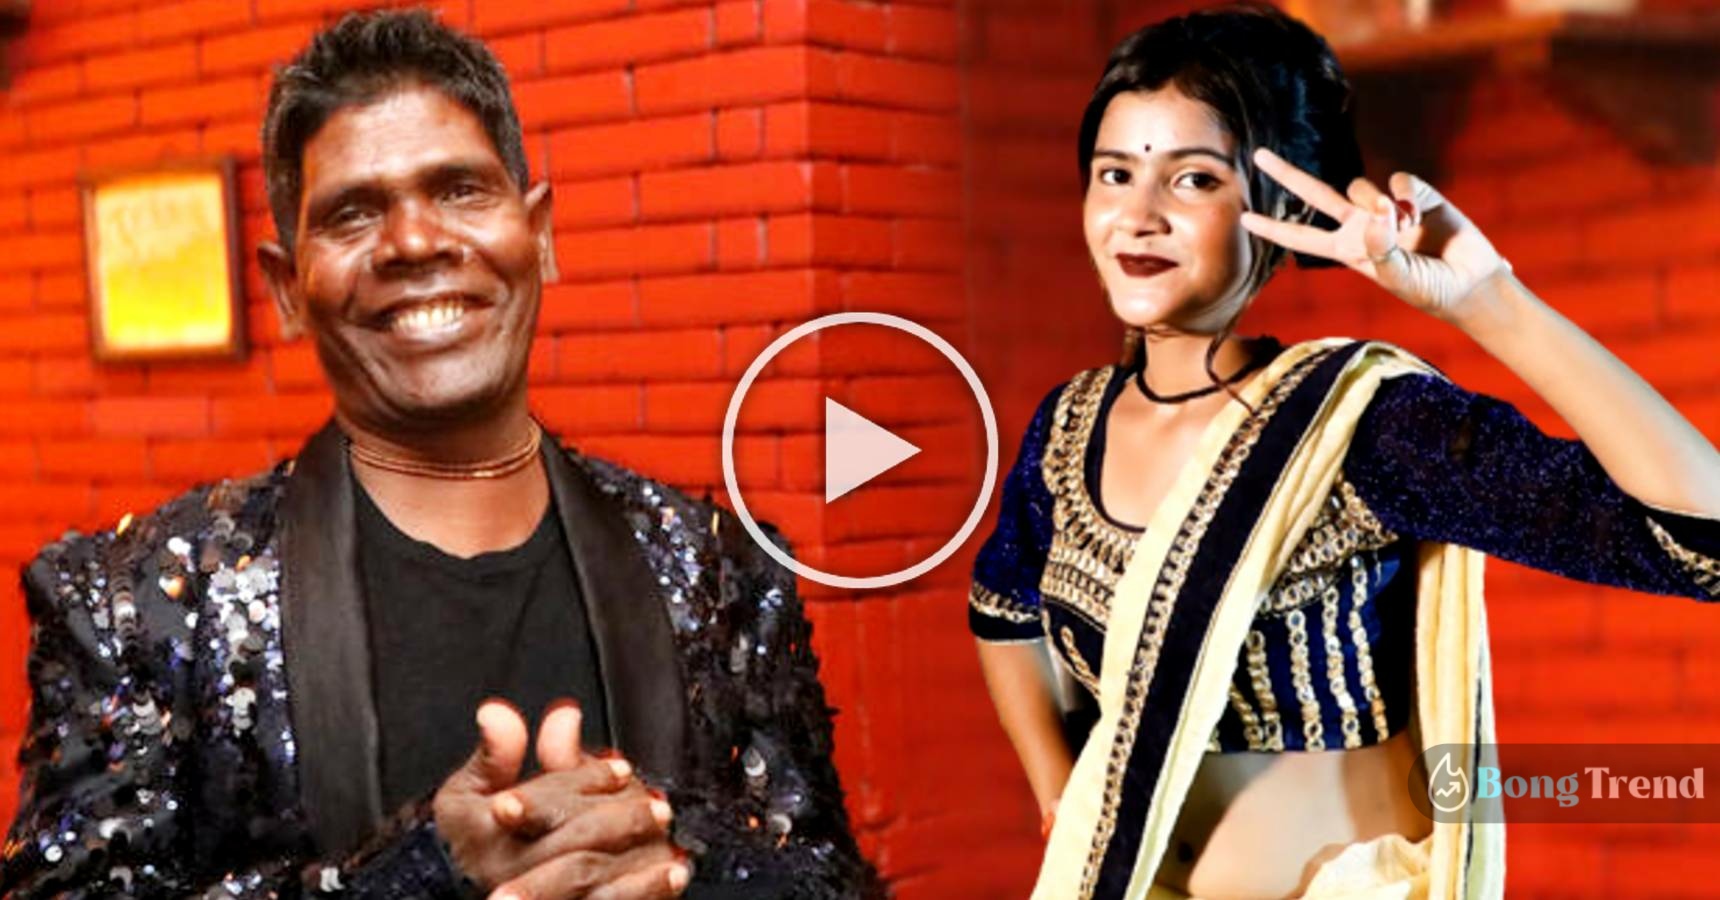 After Kacha Badam new song Paka Badam has come to the market, see video